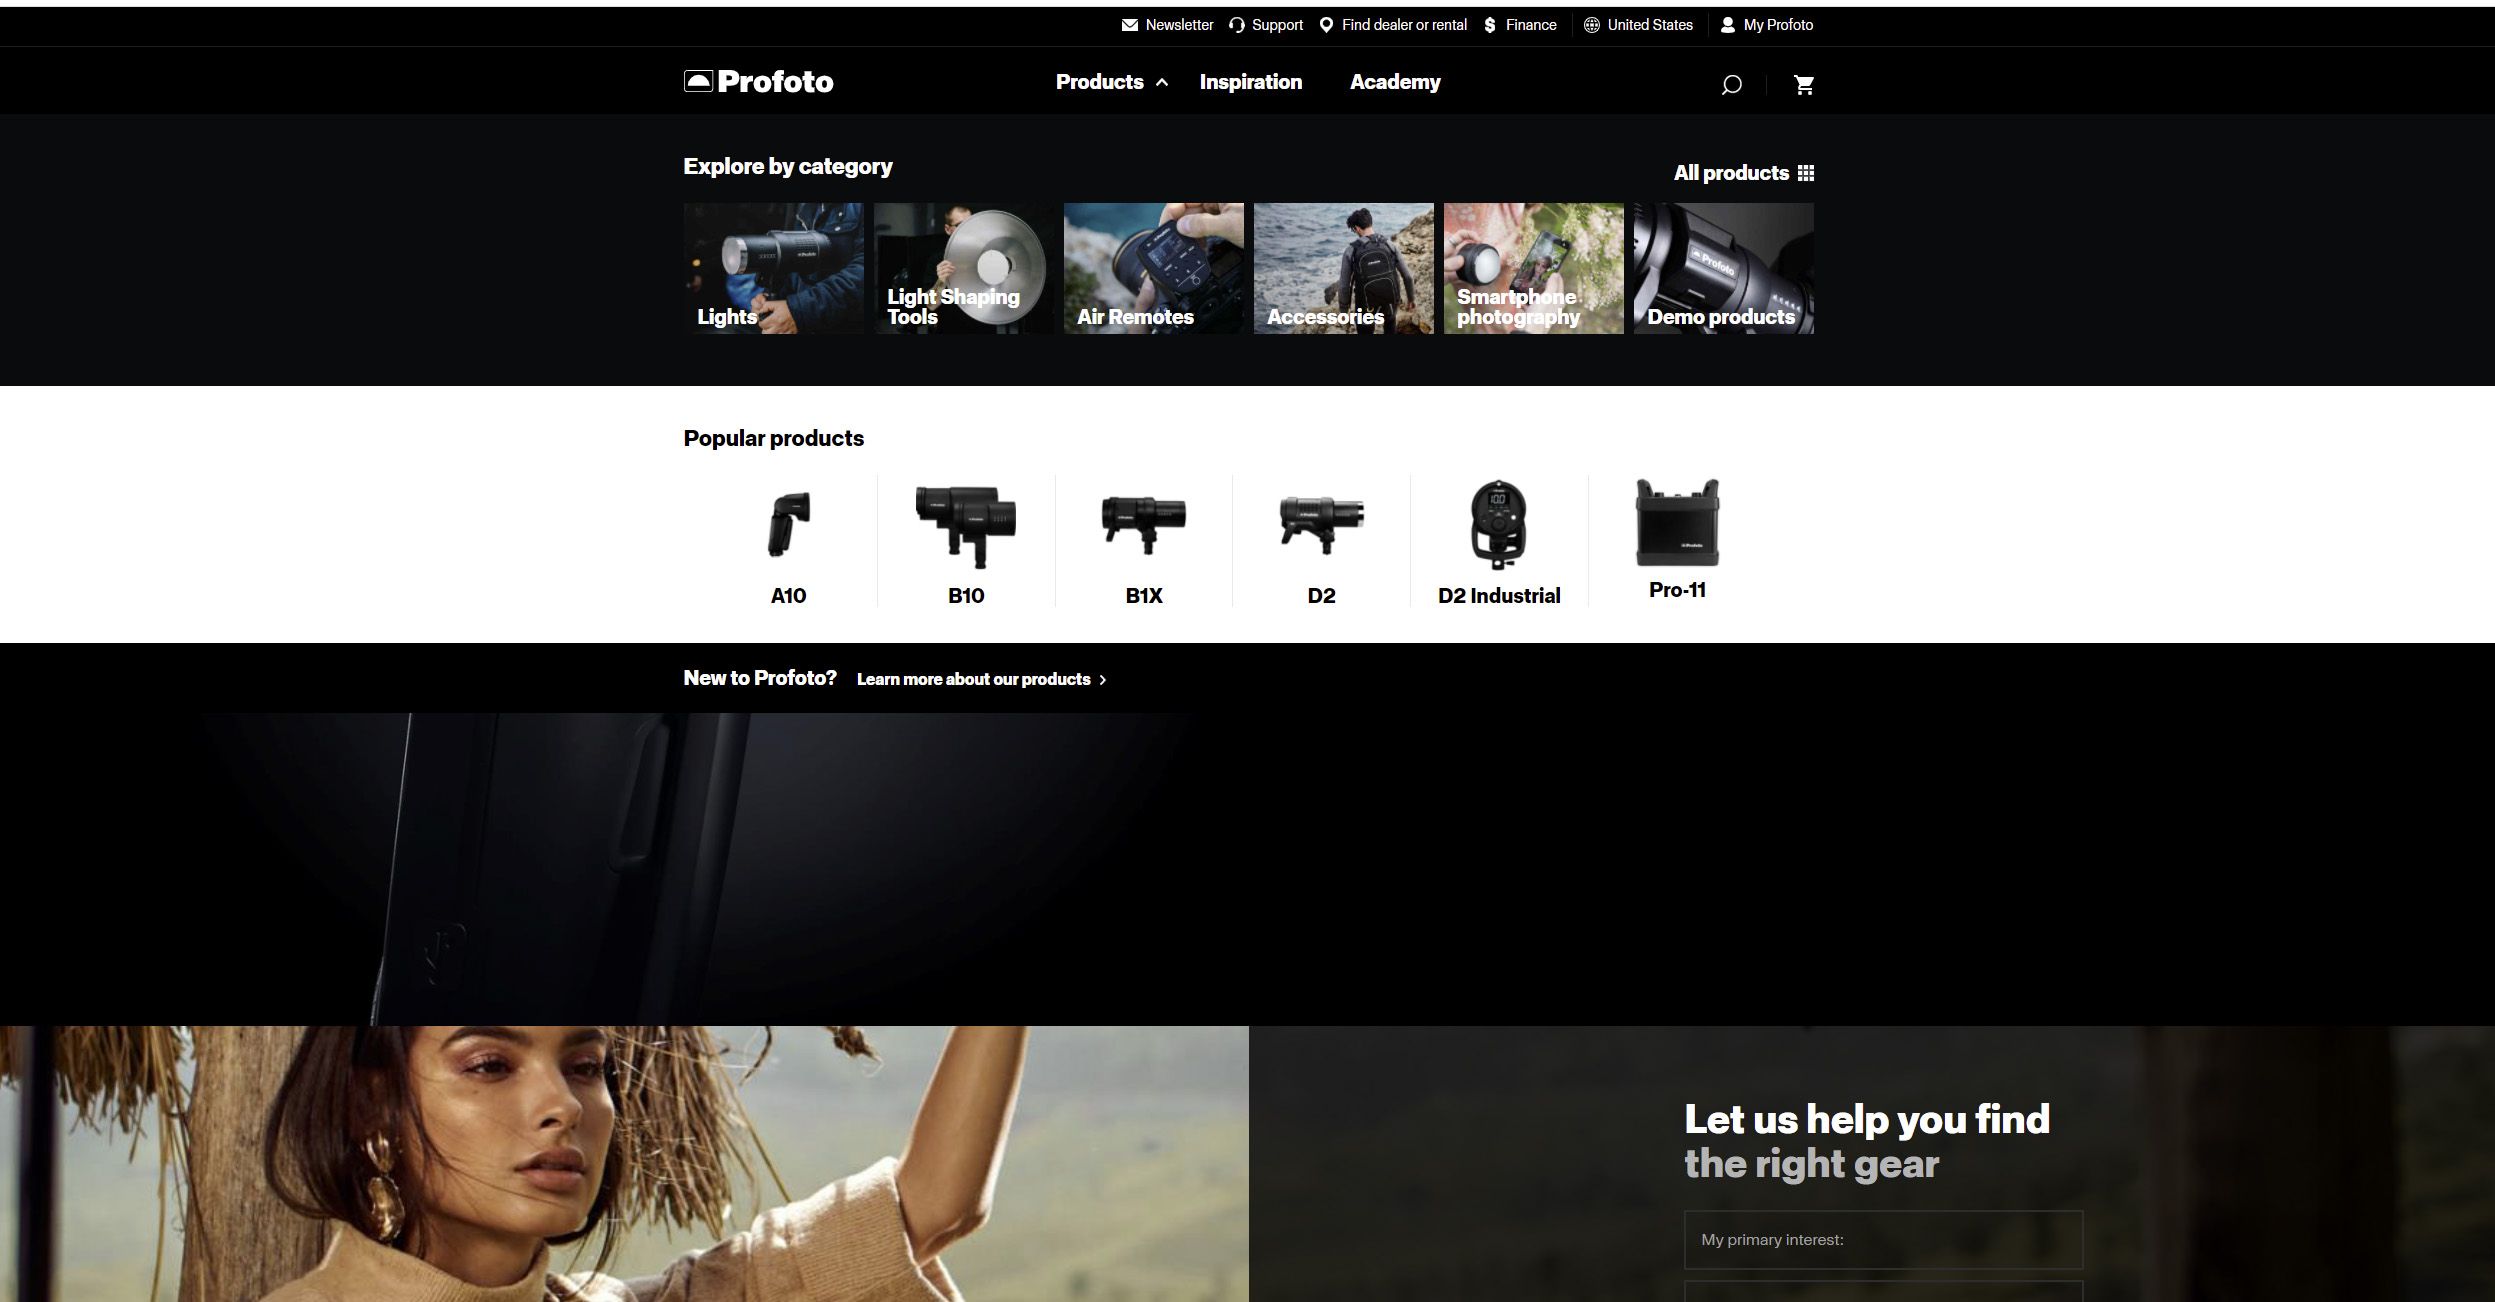 Screenshot of Profoto's web page displaying its popular products